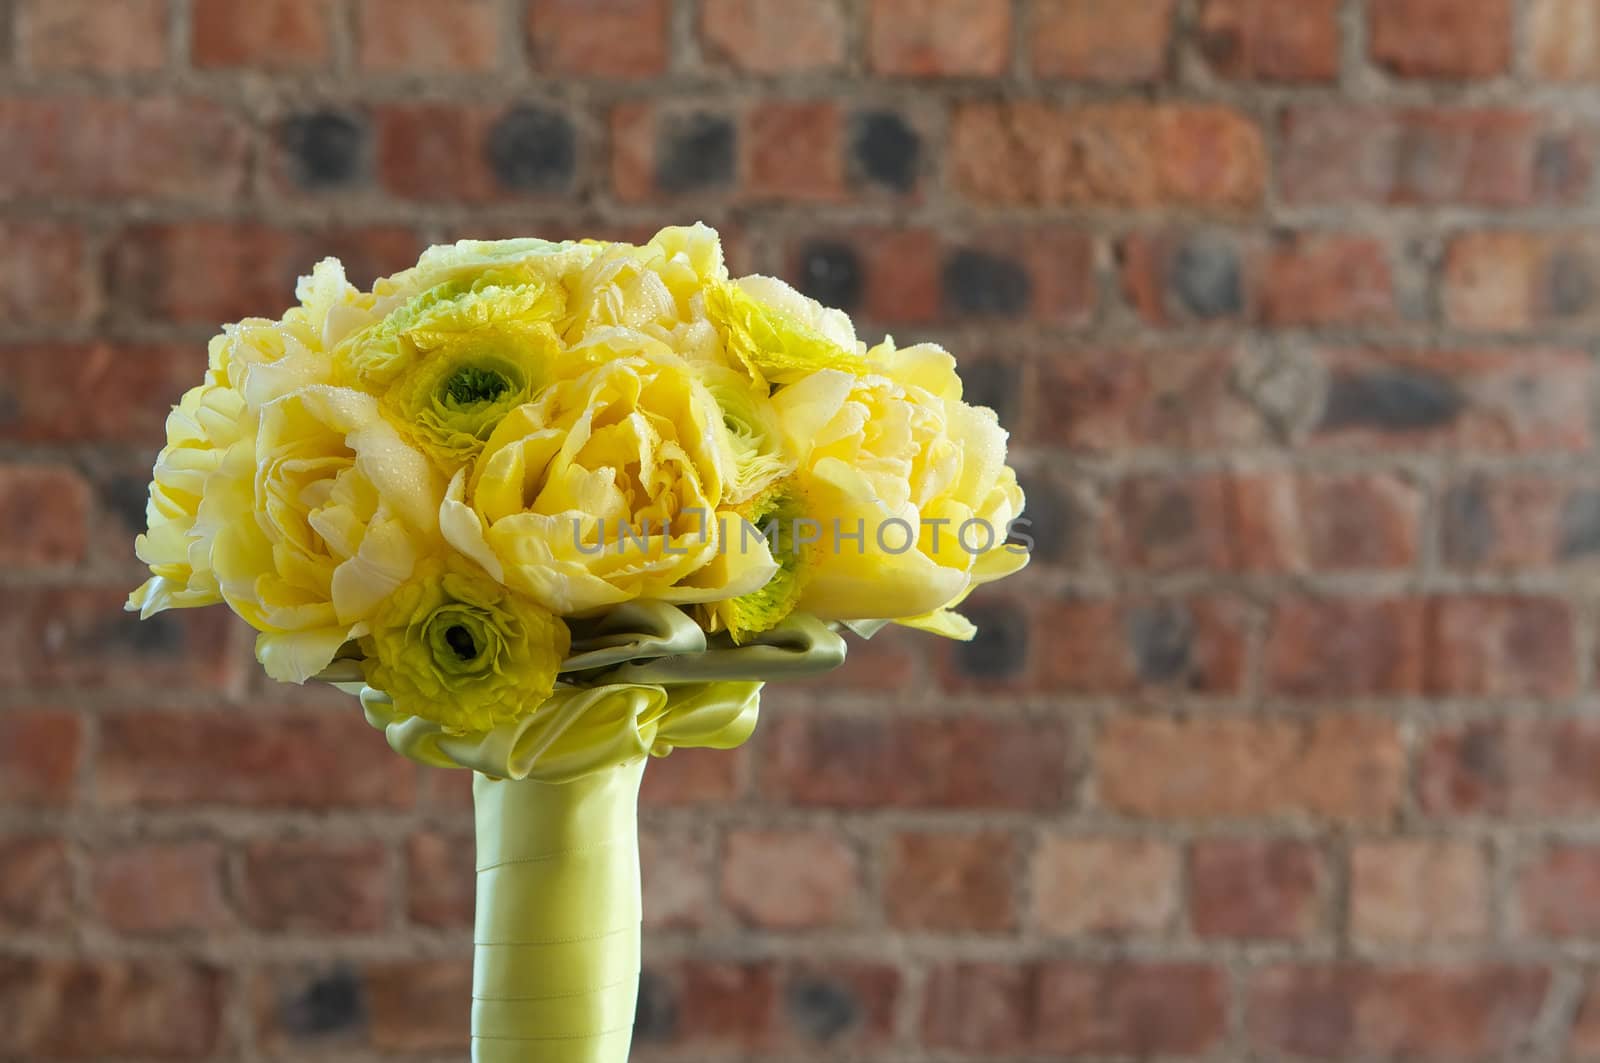 A colorful yellow bridal bouquet of flowers